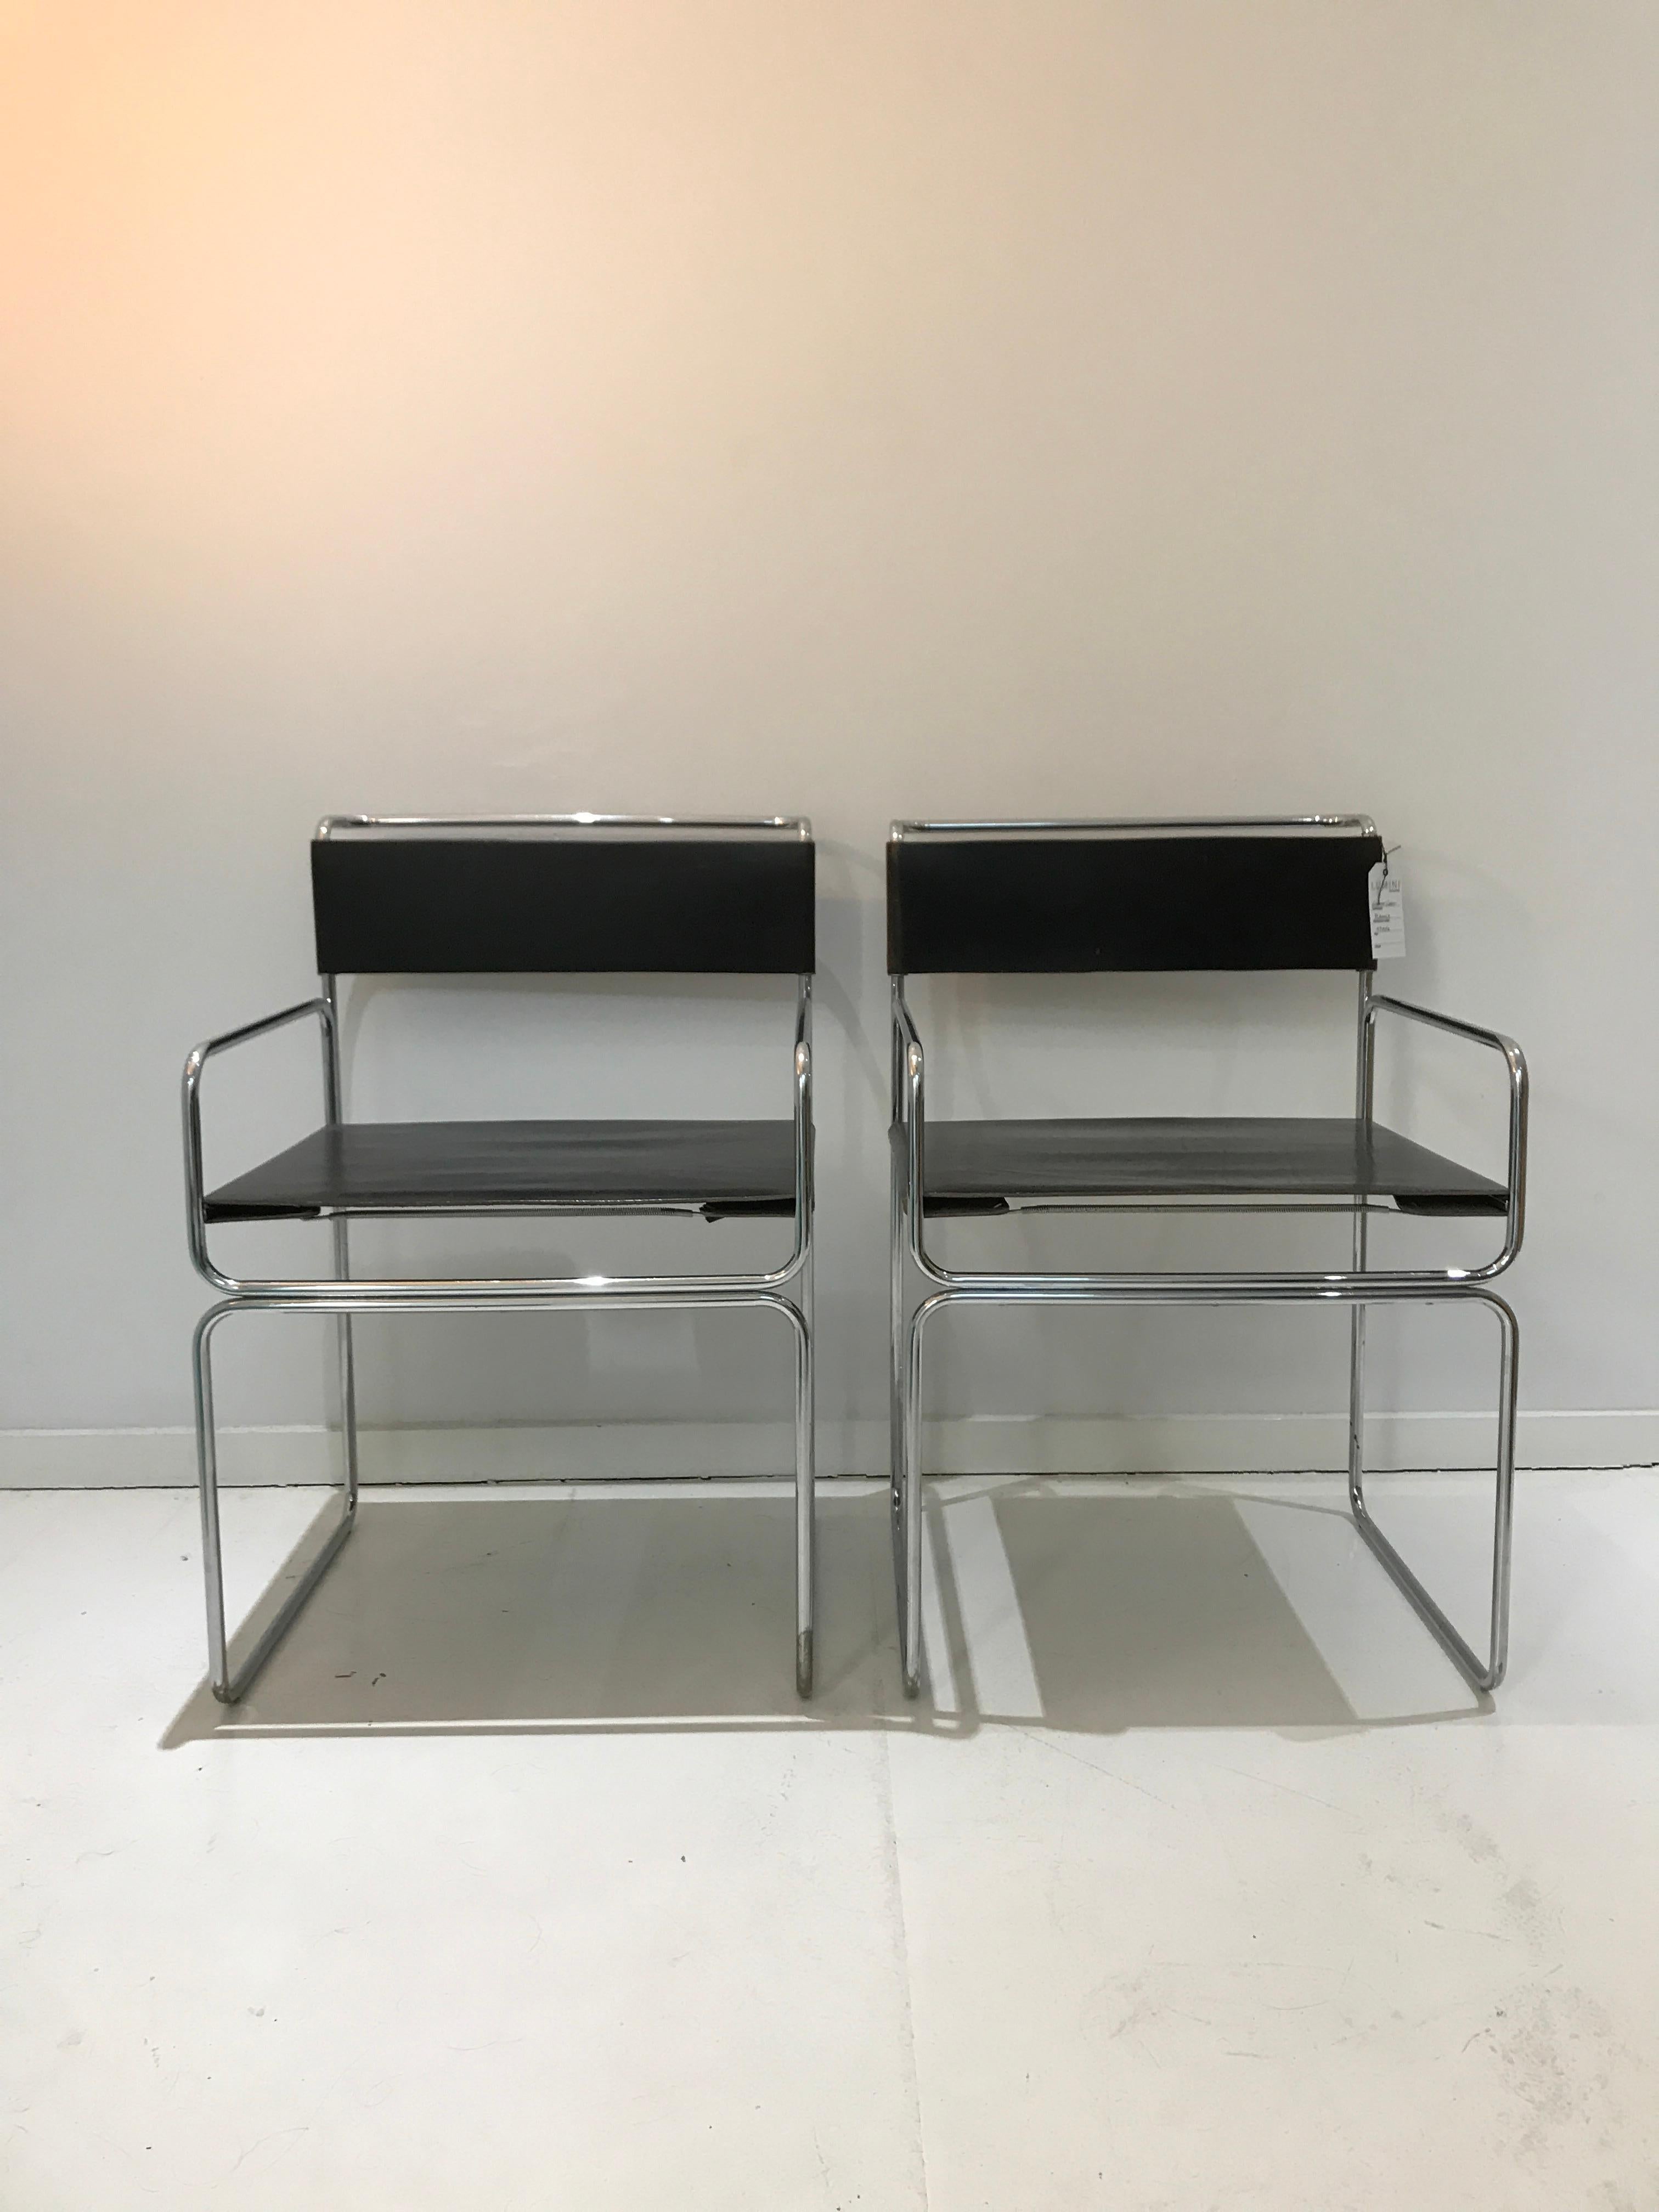 Two vintage Planula design chairs by G. Carini 1970 four leather dining chairs by designer Giovanni Carini and made by Planula Design Italy. These chairs have a chrome-plated tubular steel frame with thick leather and not often seen with armrests!